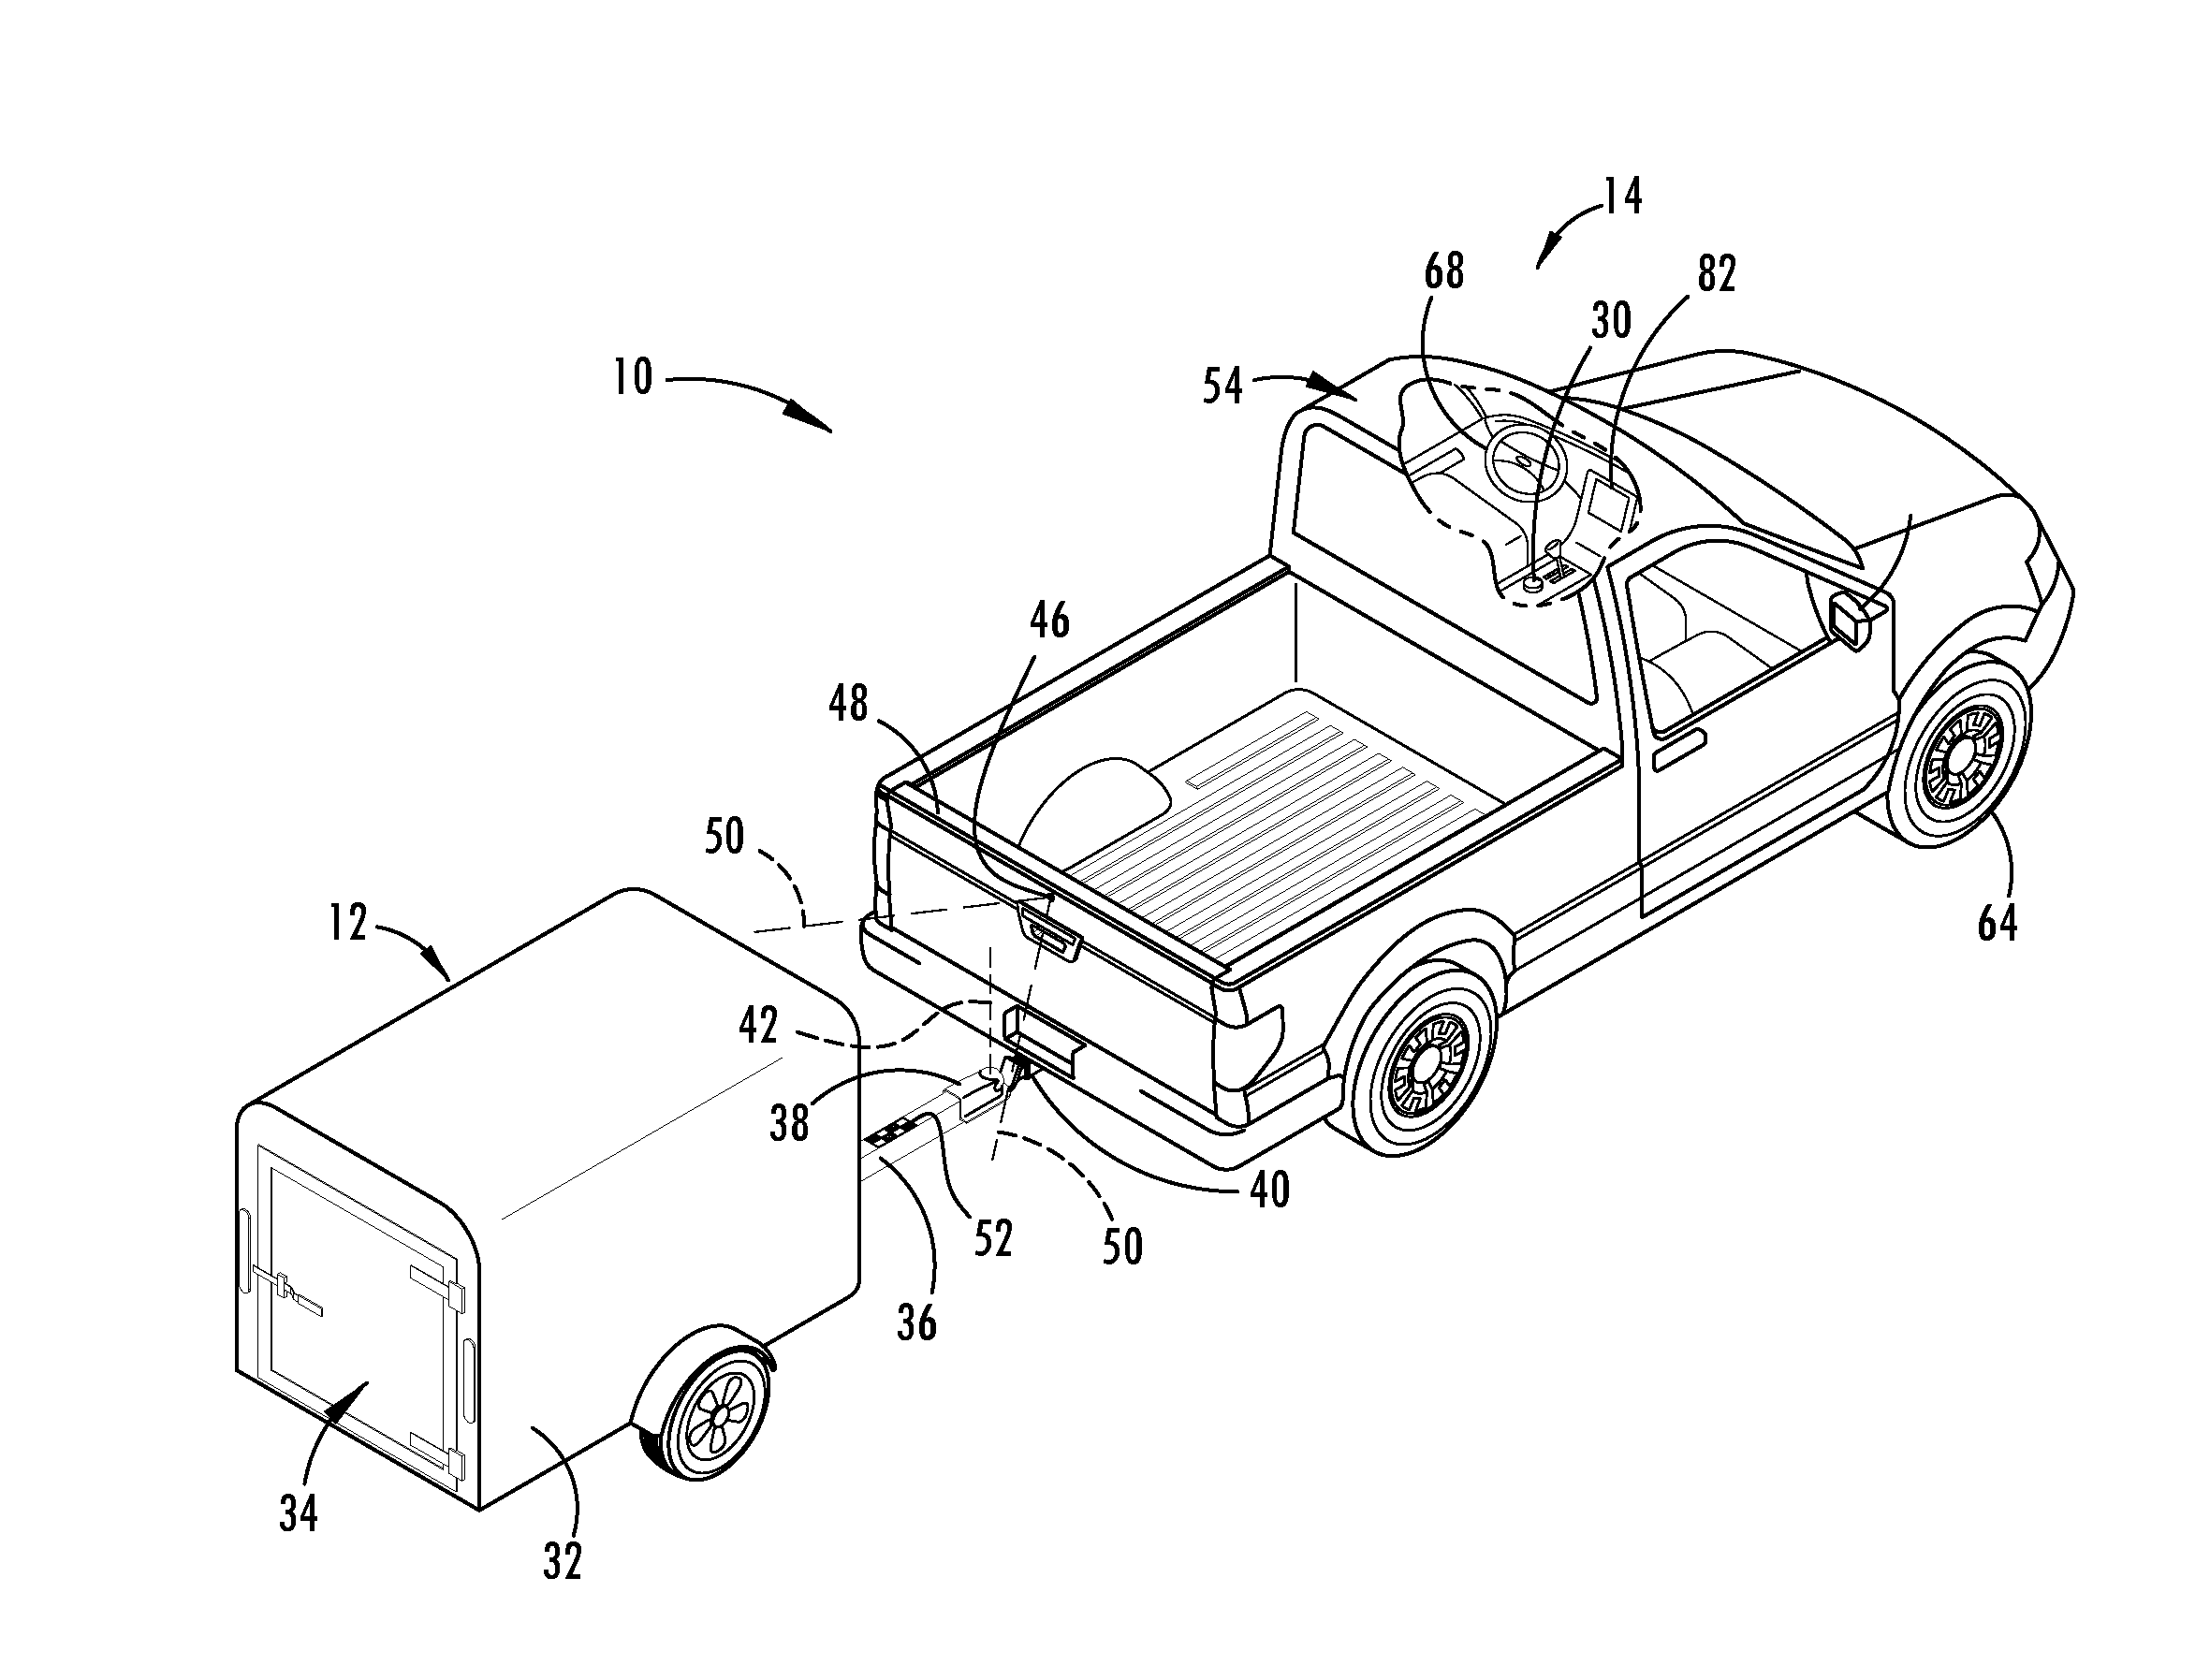 Trailer backup assist system with normalized steering input device for different trailers